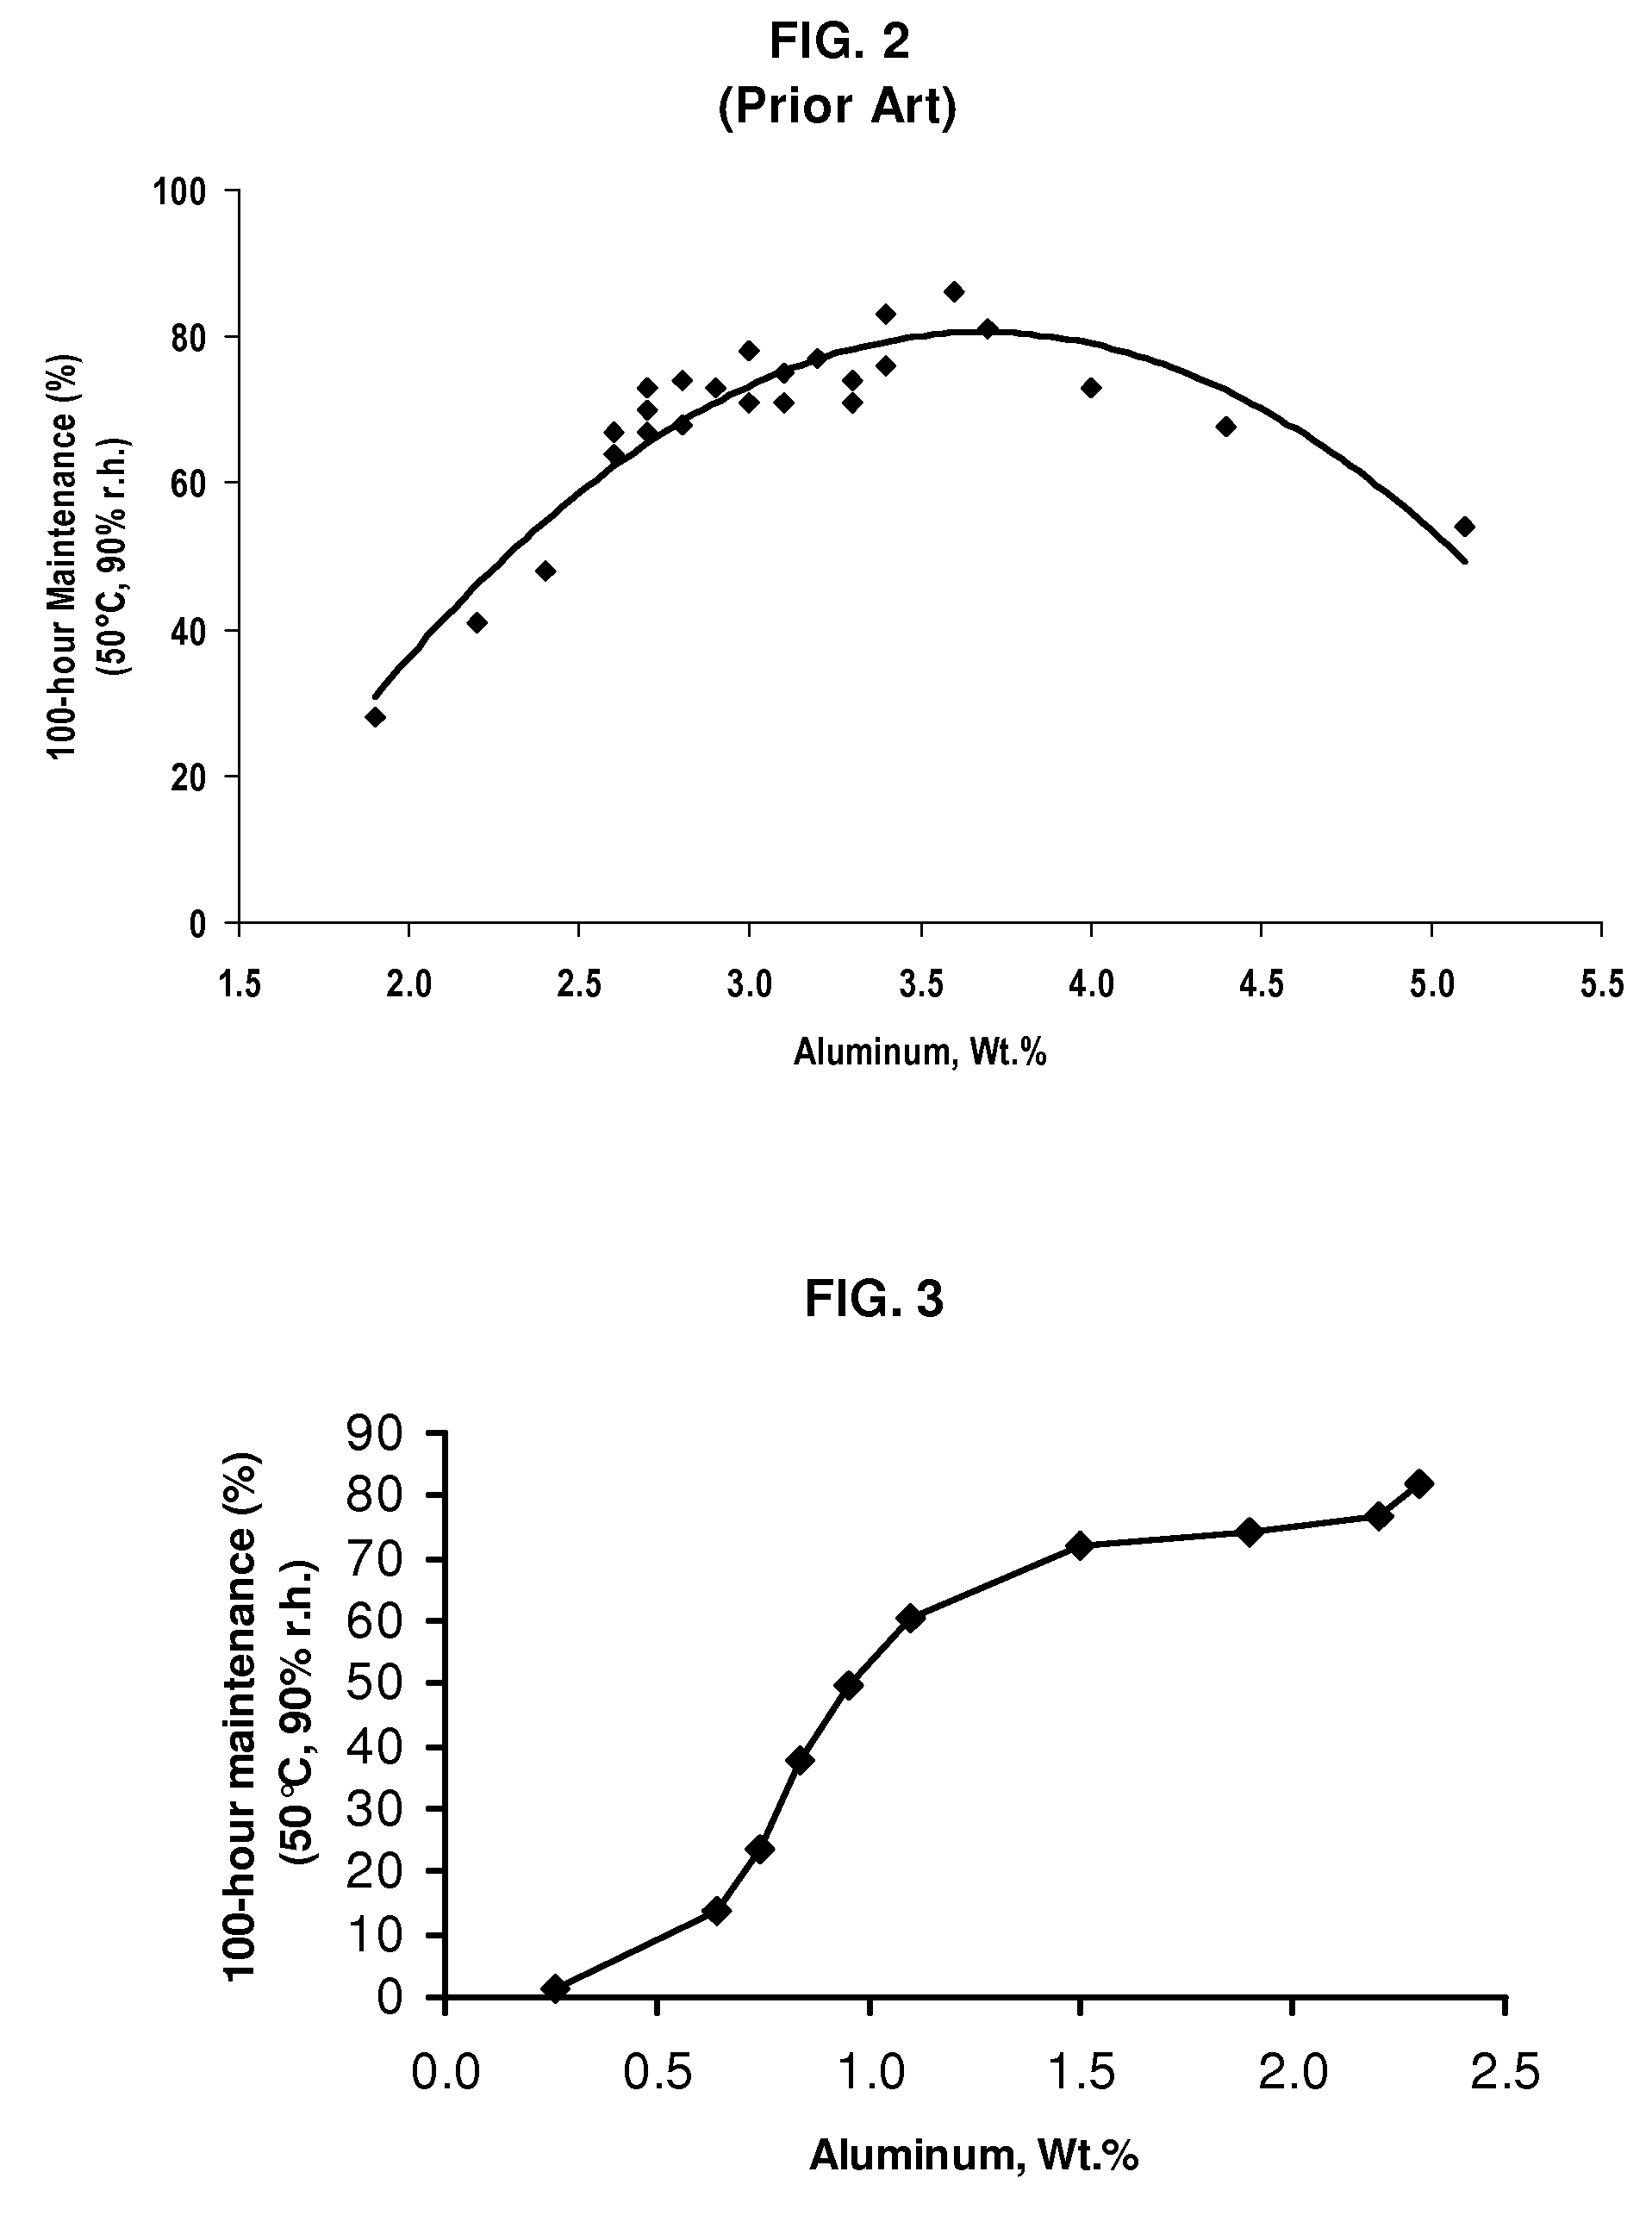 Moisture-resistant Electroluminescent Phosphor with High Initial Brightness and Method of Making